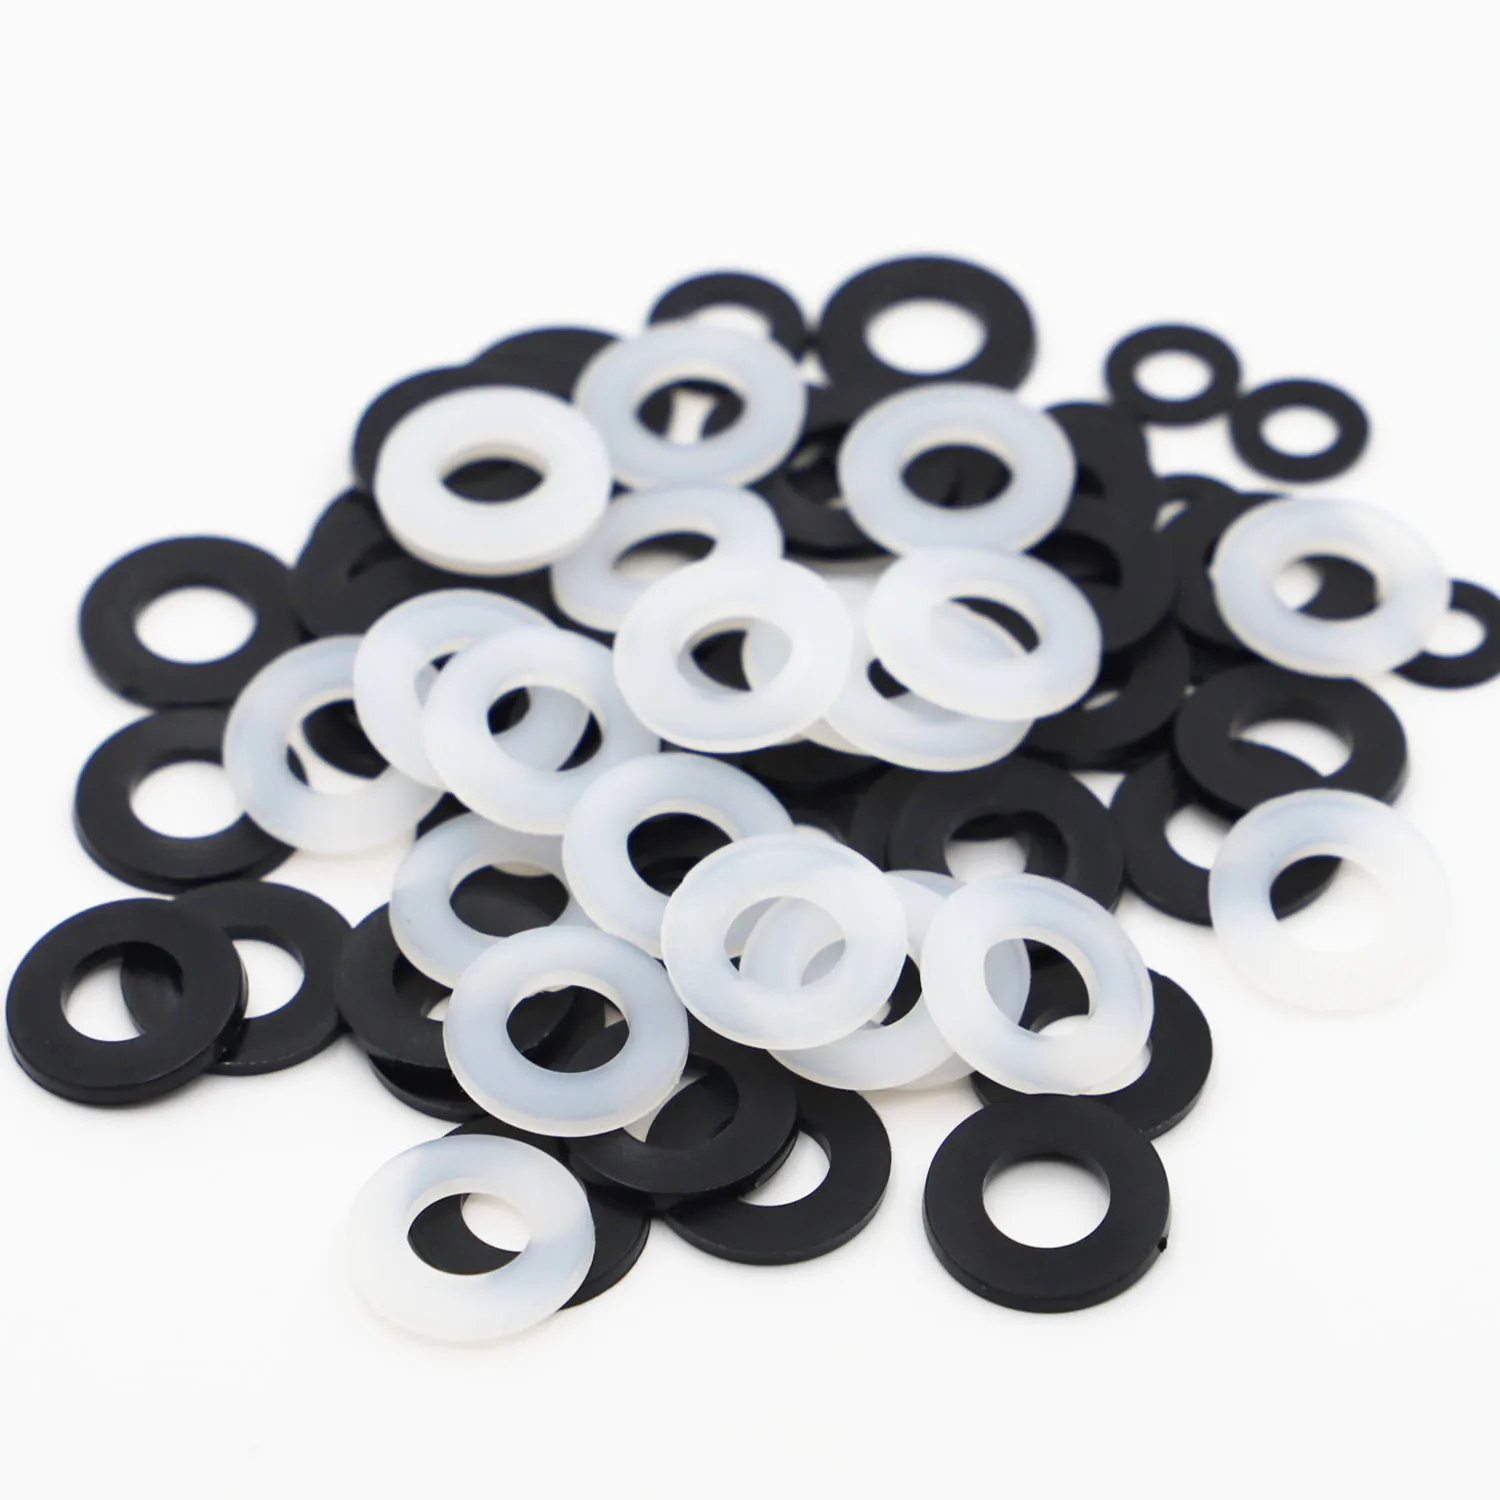 

50/100 x M2 M2.5 M3 M4 M5 M6 M8 M10 M12 White Black Plastic Nylon Flat Washer Plane Spacer Insulation Gasket Ring For Screw Bolt